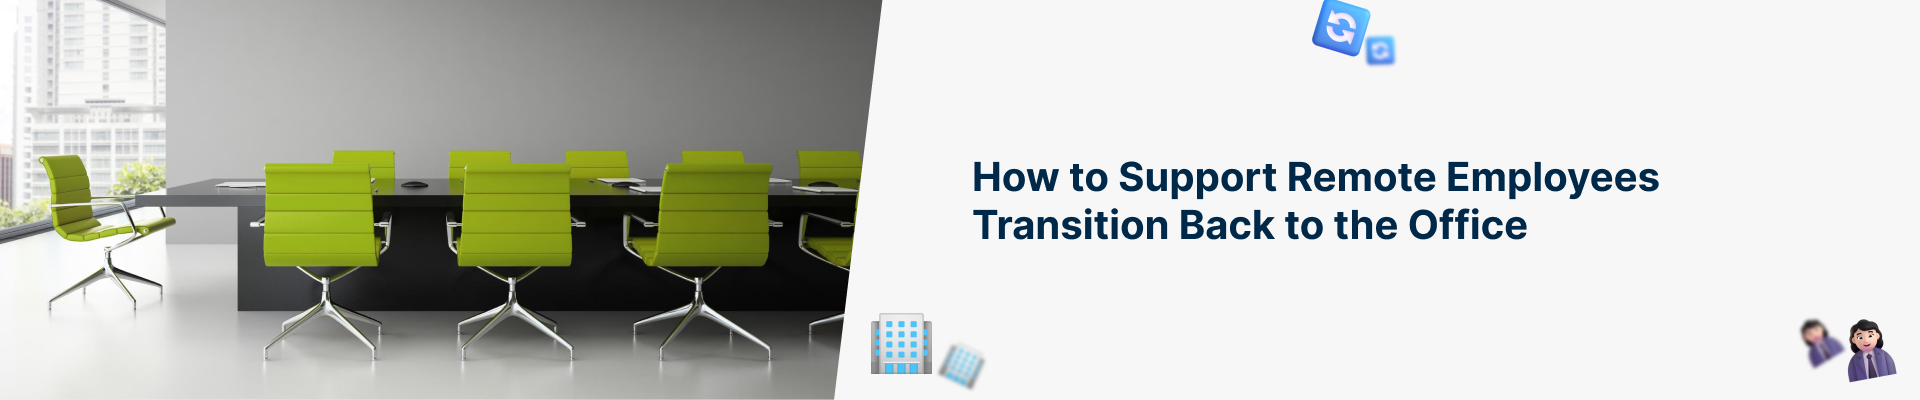 How to Support Remote Employees Transition Back to the Office